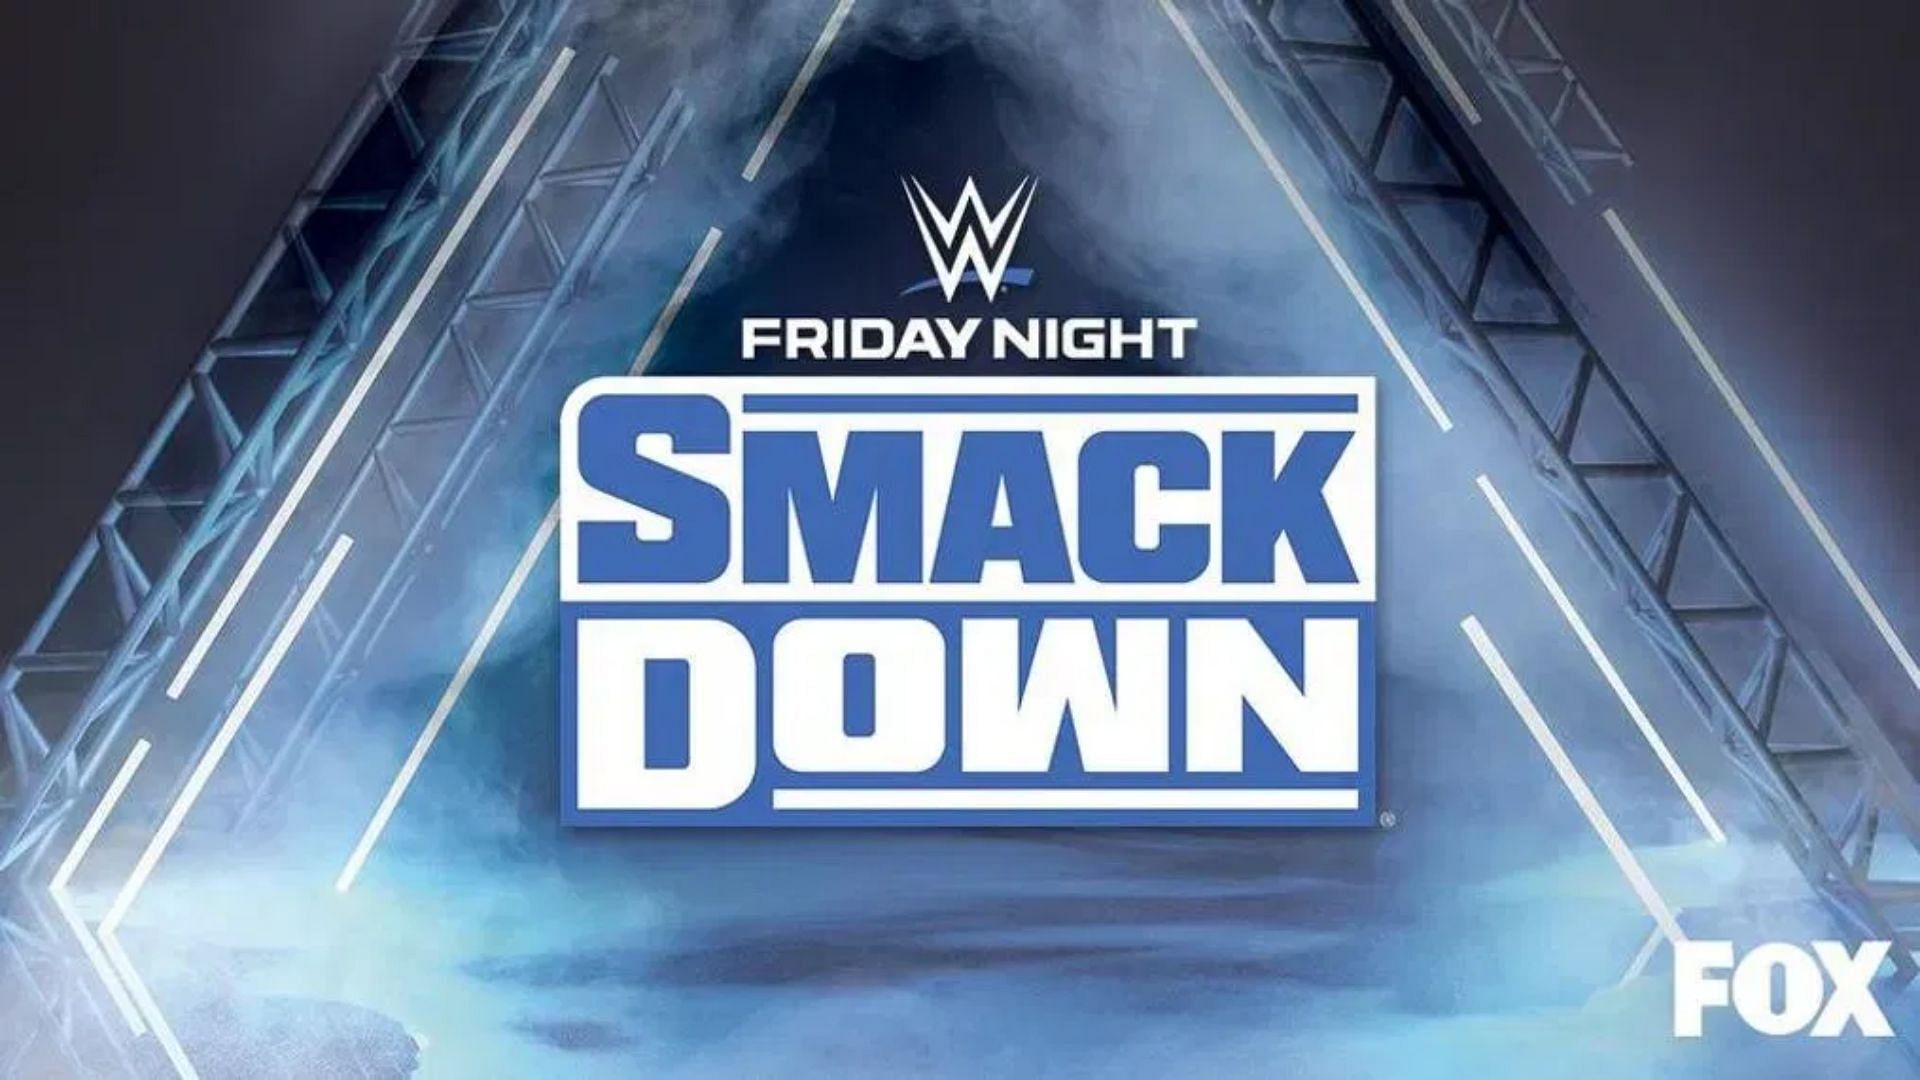 It may be the end for the career of SmackDown